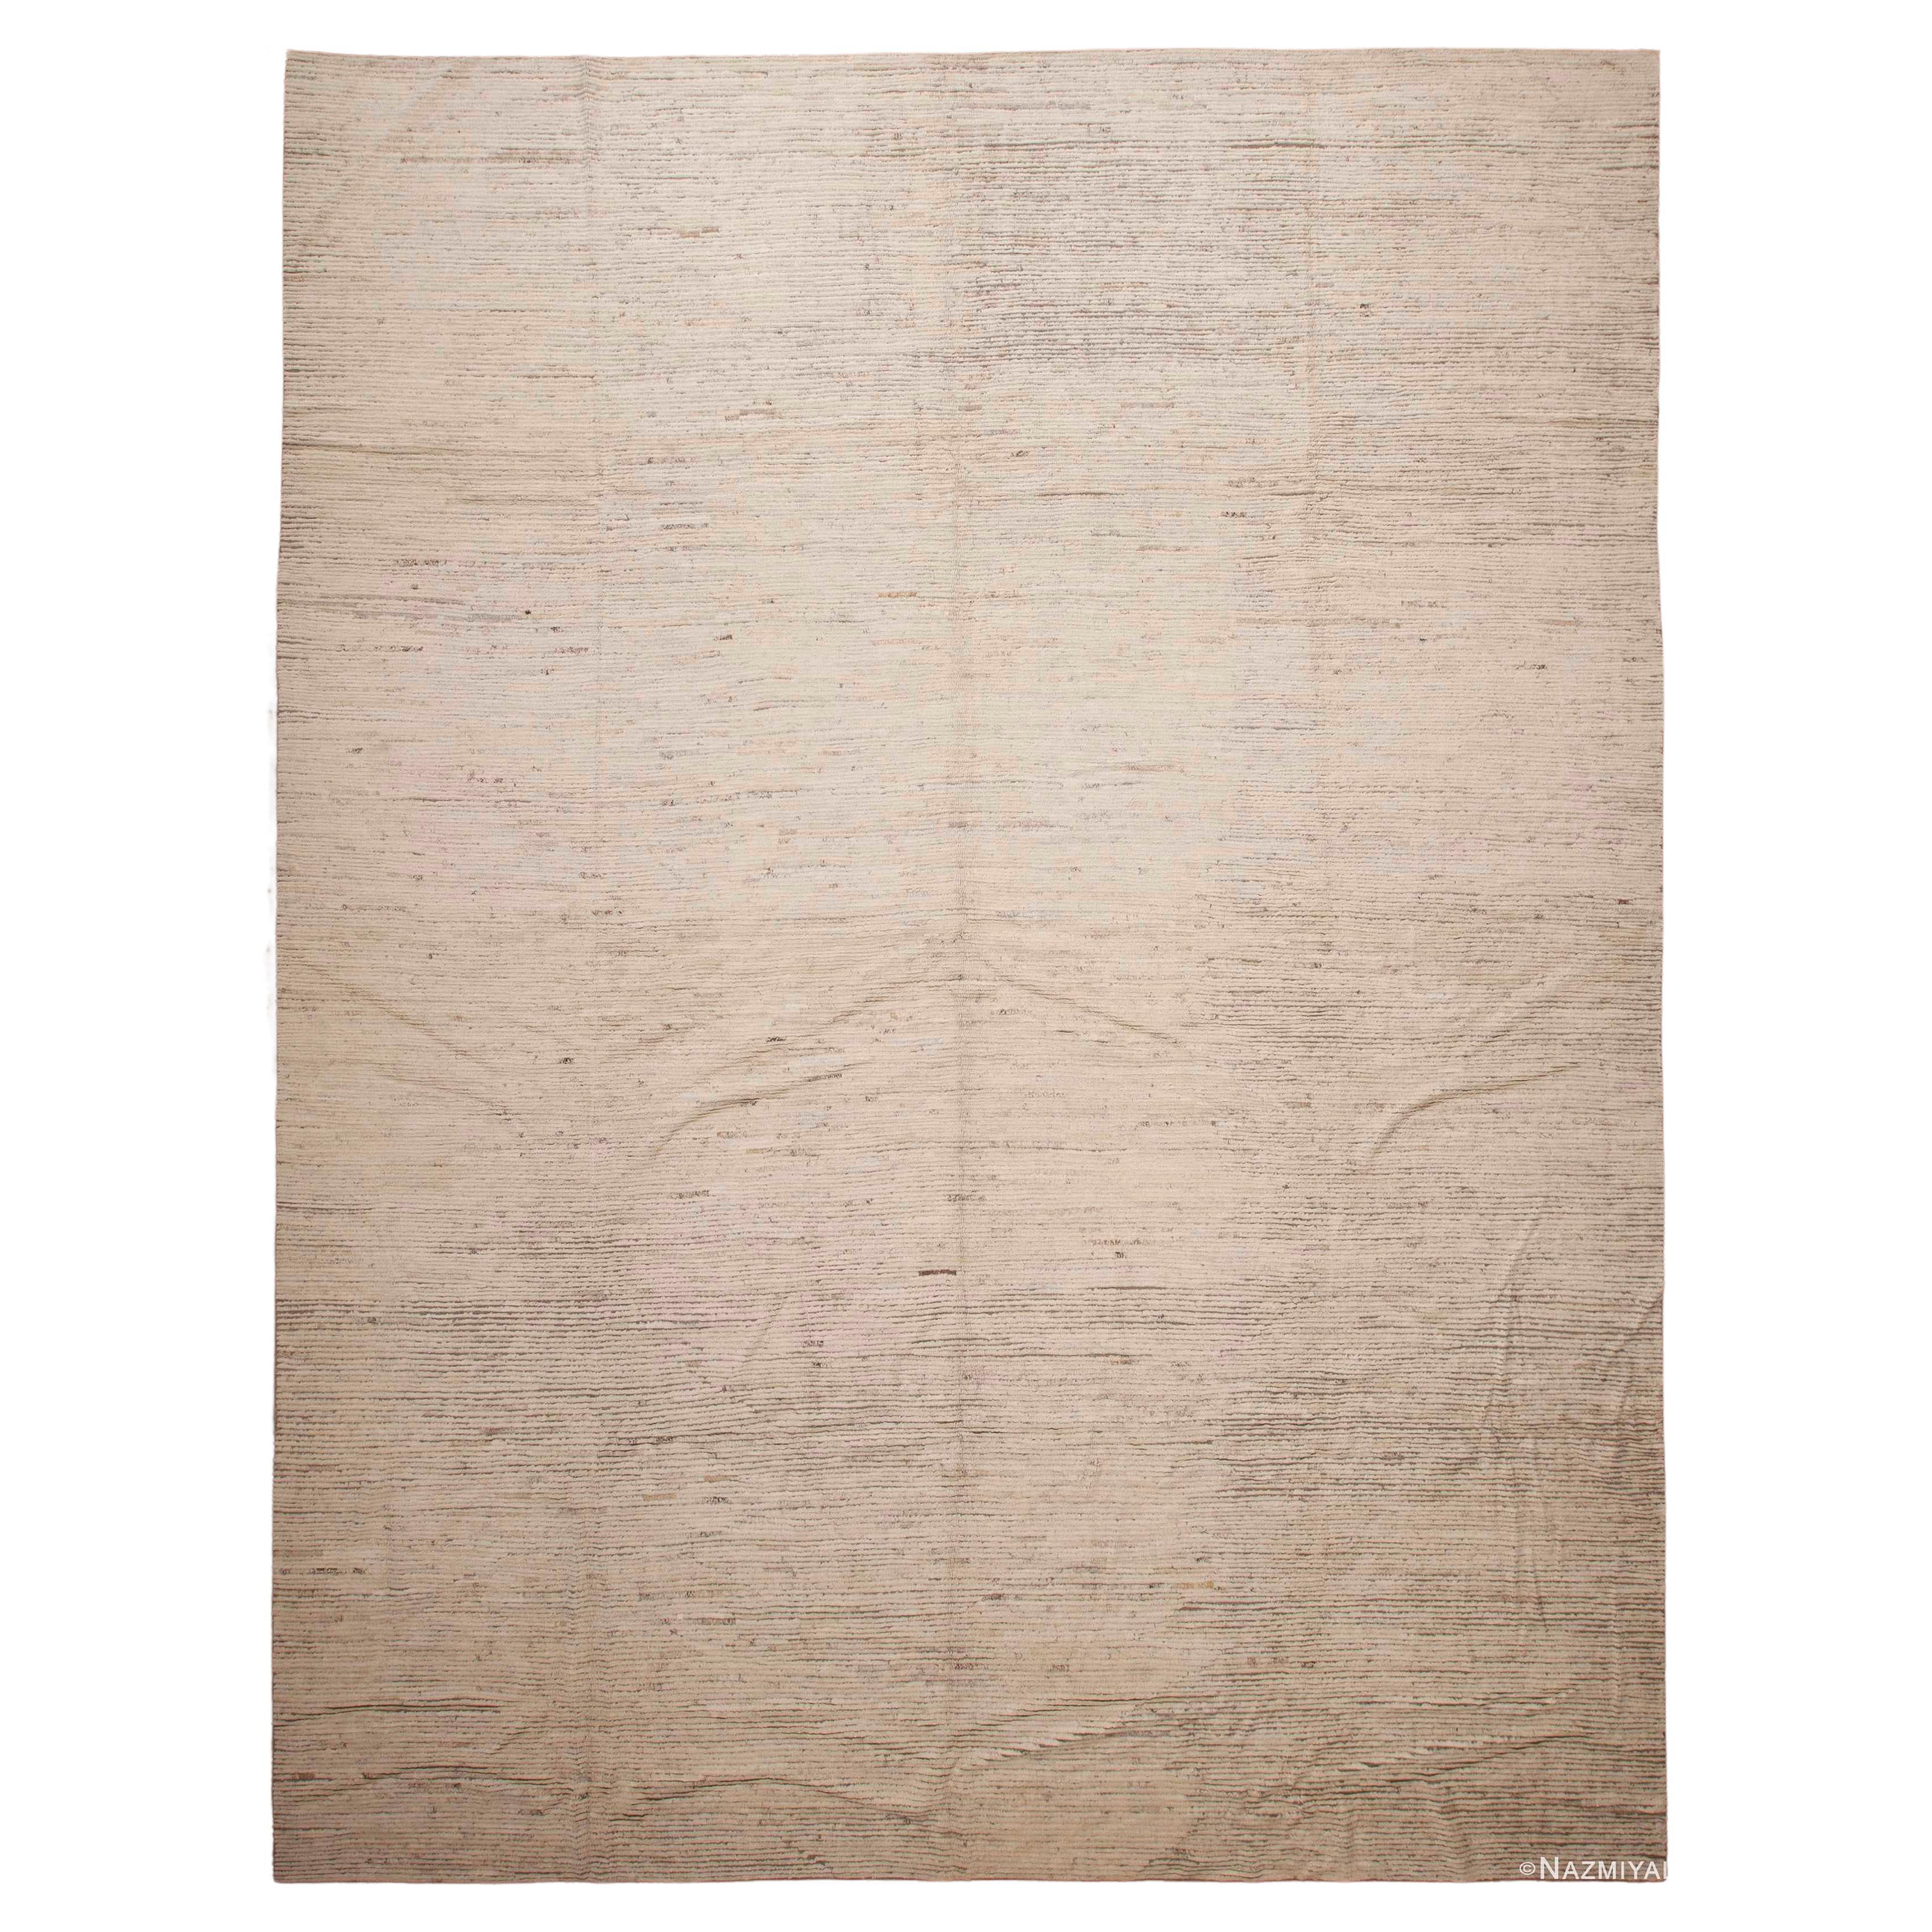 Nazmiyal Collection Ivory Color Background Modern Wool Pile Rug 13' x 17'5"